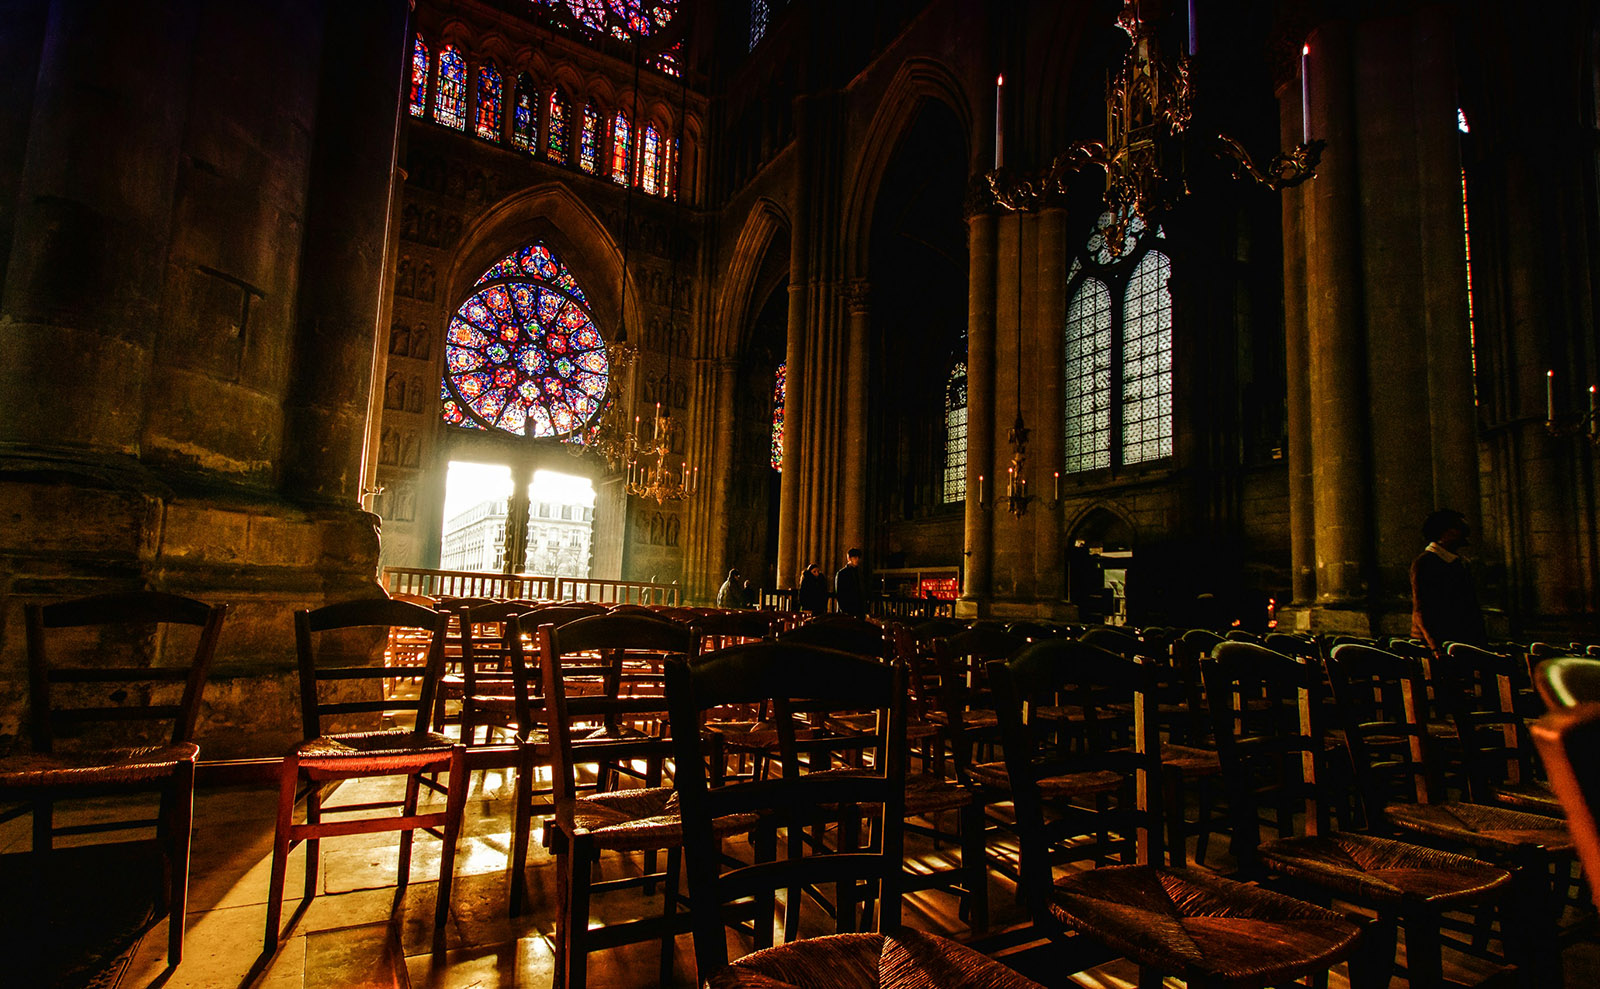 the inside of a dark church with brown wooden chairs and light shining through a round stained glass window